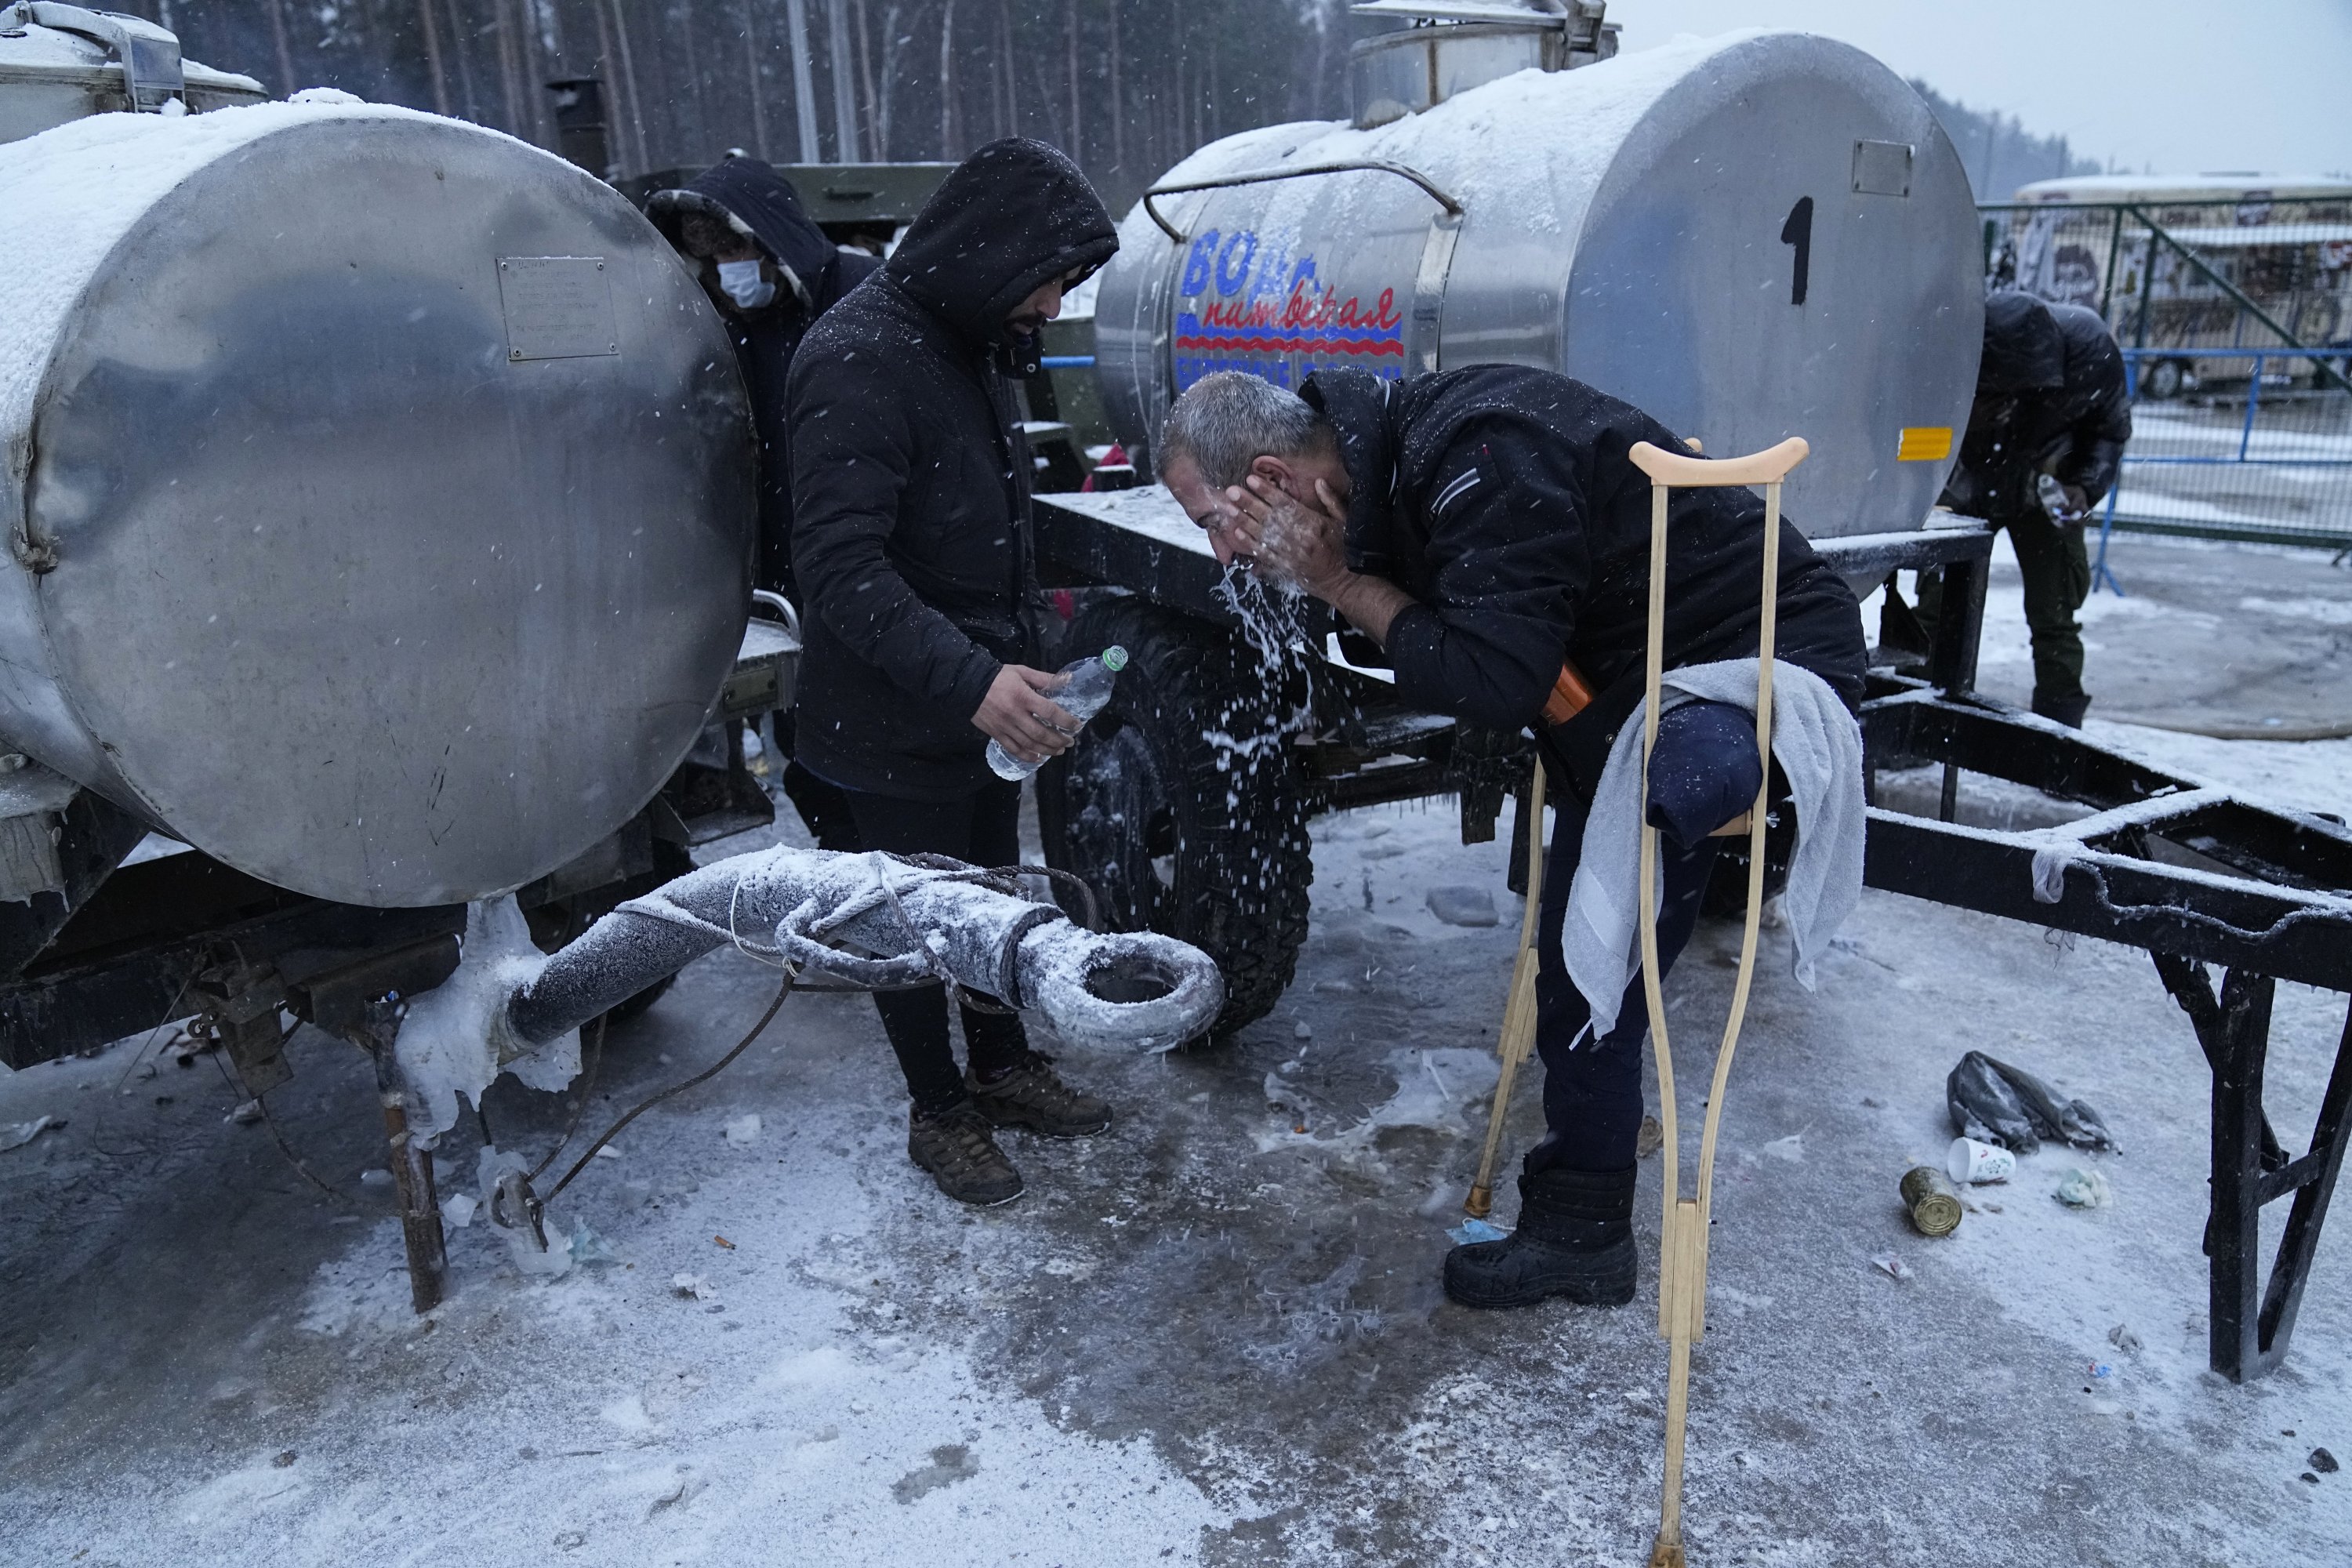 A migrant washes his head with cold water at the "Bruzgi" checkpoint logistics center at the Belarus-Poland border near Grodno, Belarus, Dec. 23, 2021. (AP Photo)